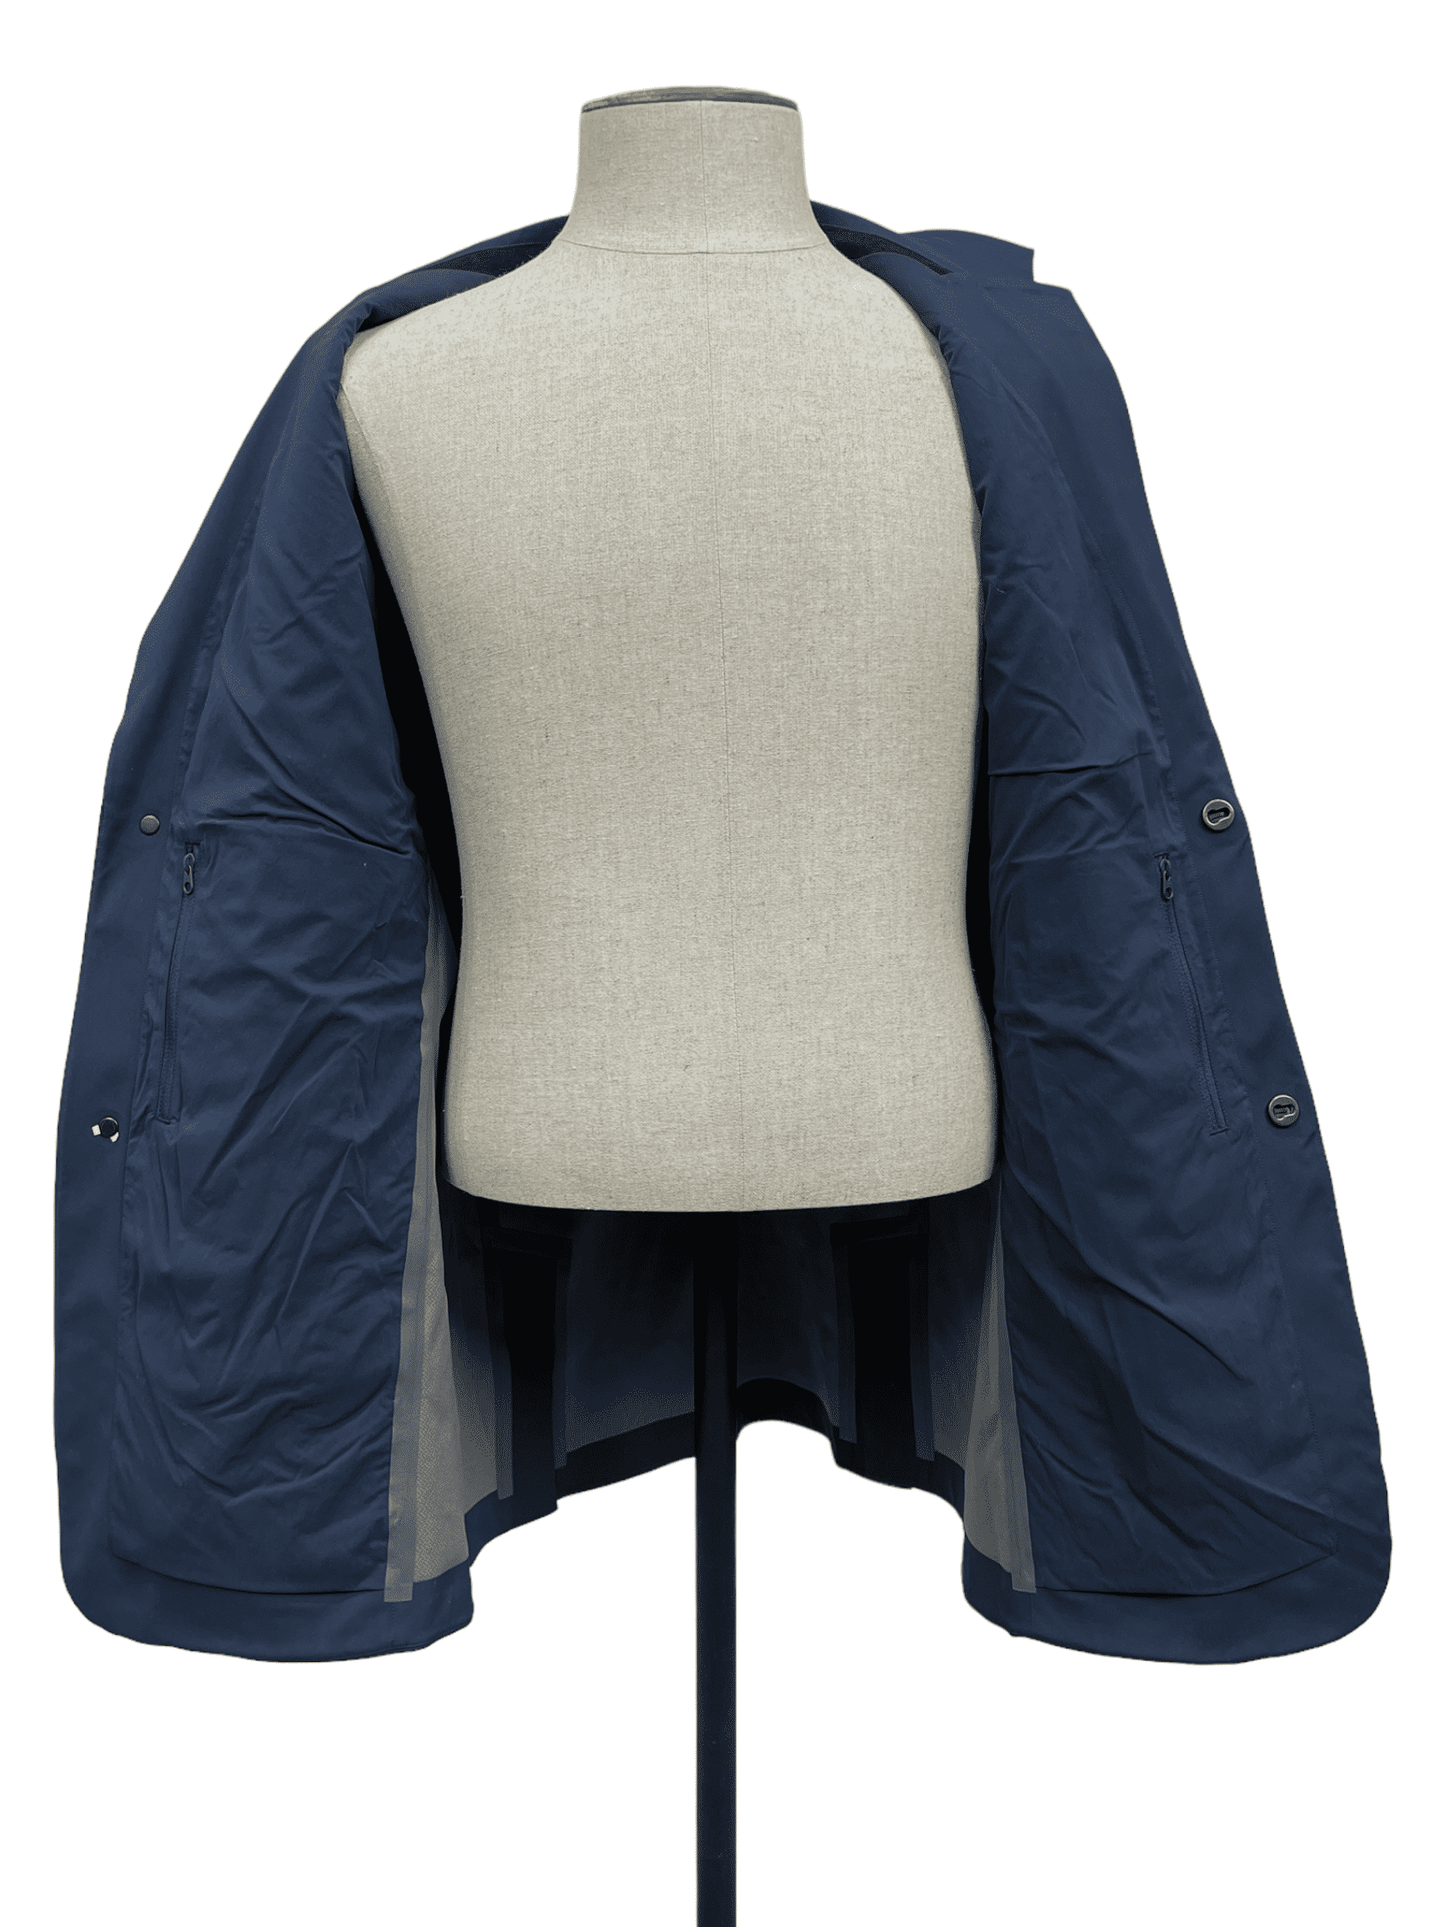 Arc'Teryx Navy Blazer - Genuine Design Luxury Consignment for Men. New & Pre-Owned Clothing, Shoes, & Accessories. Calgary, Canada